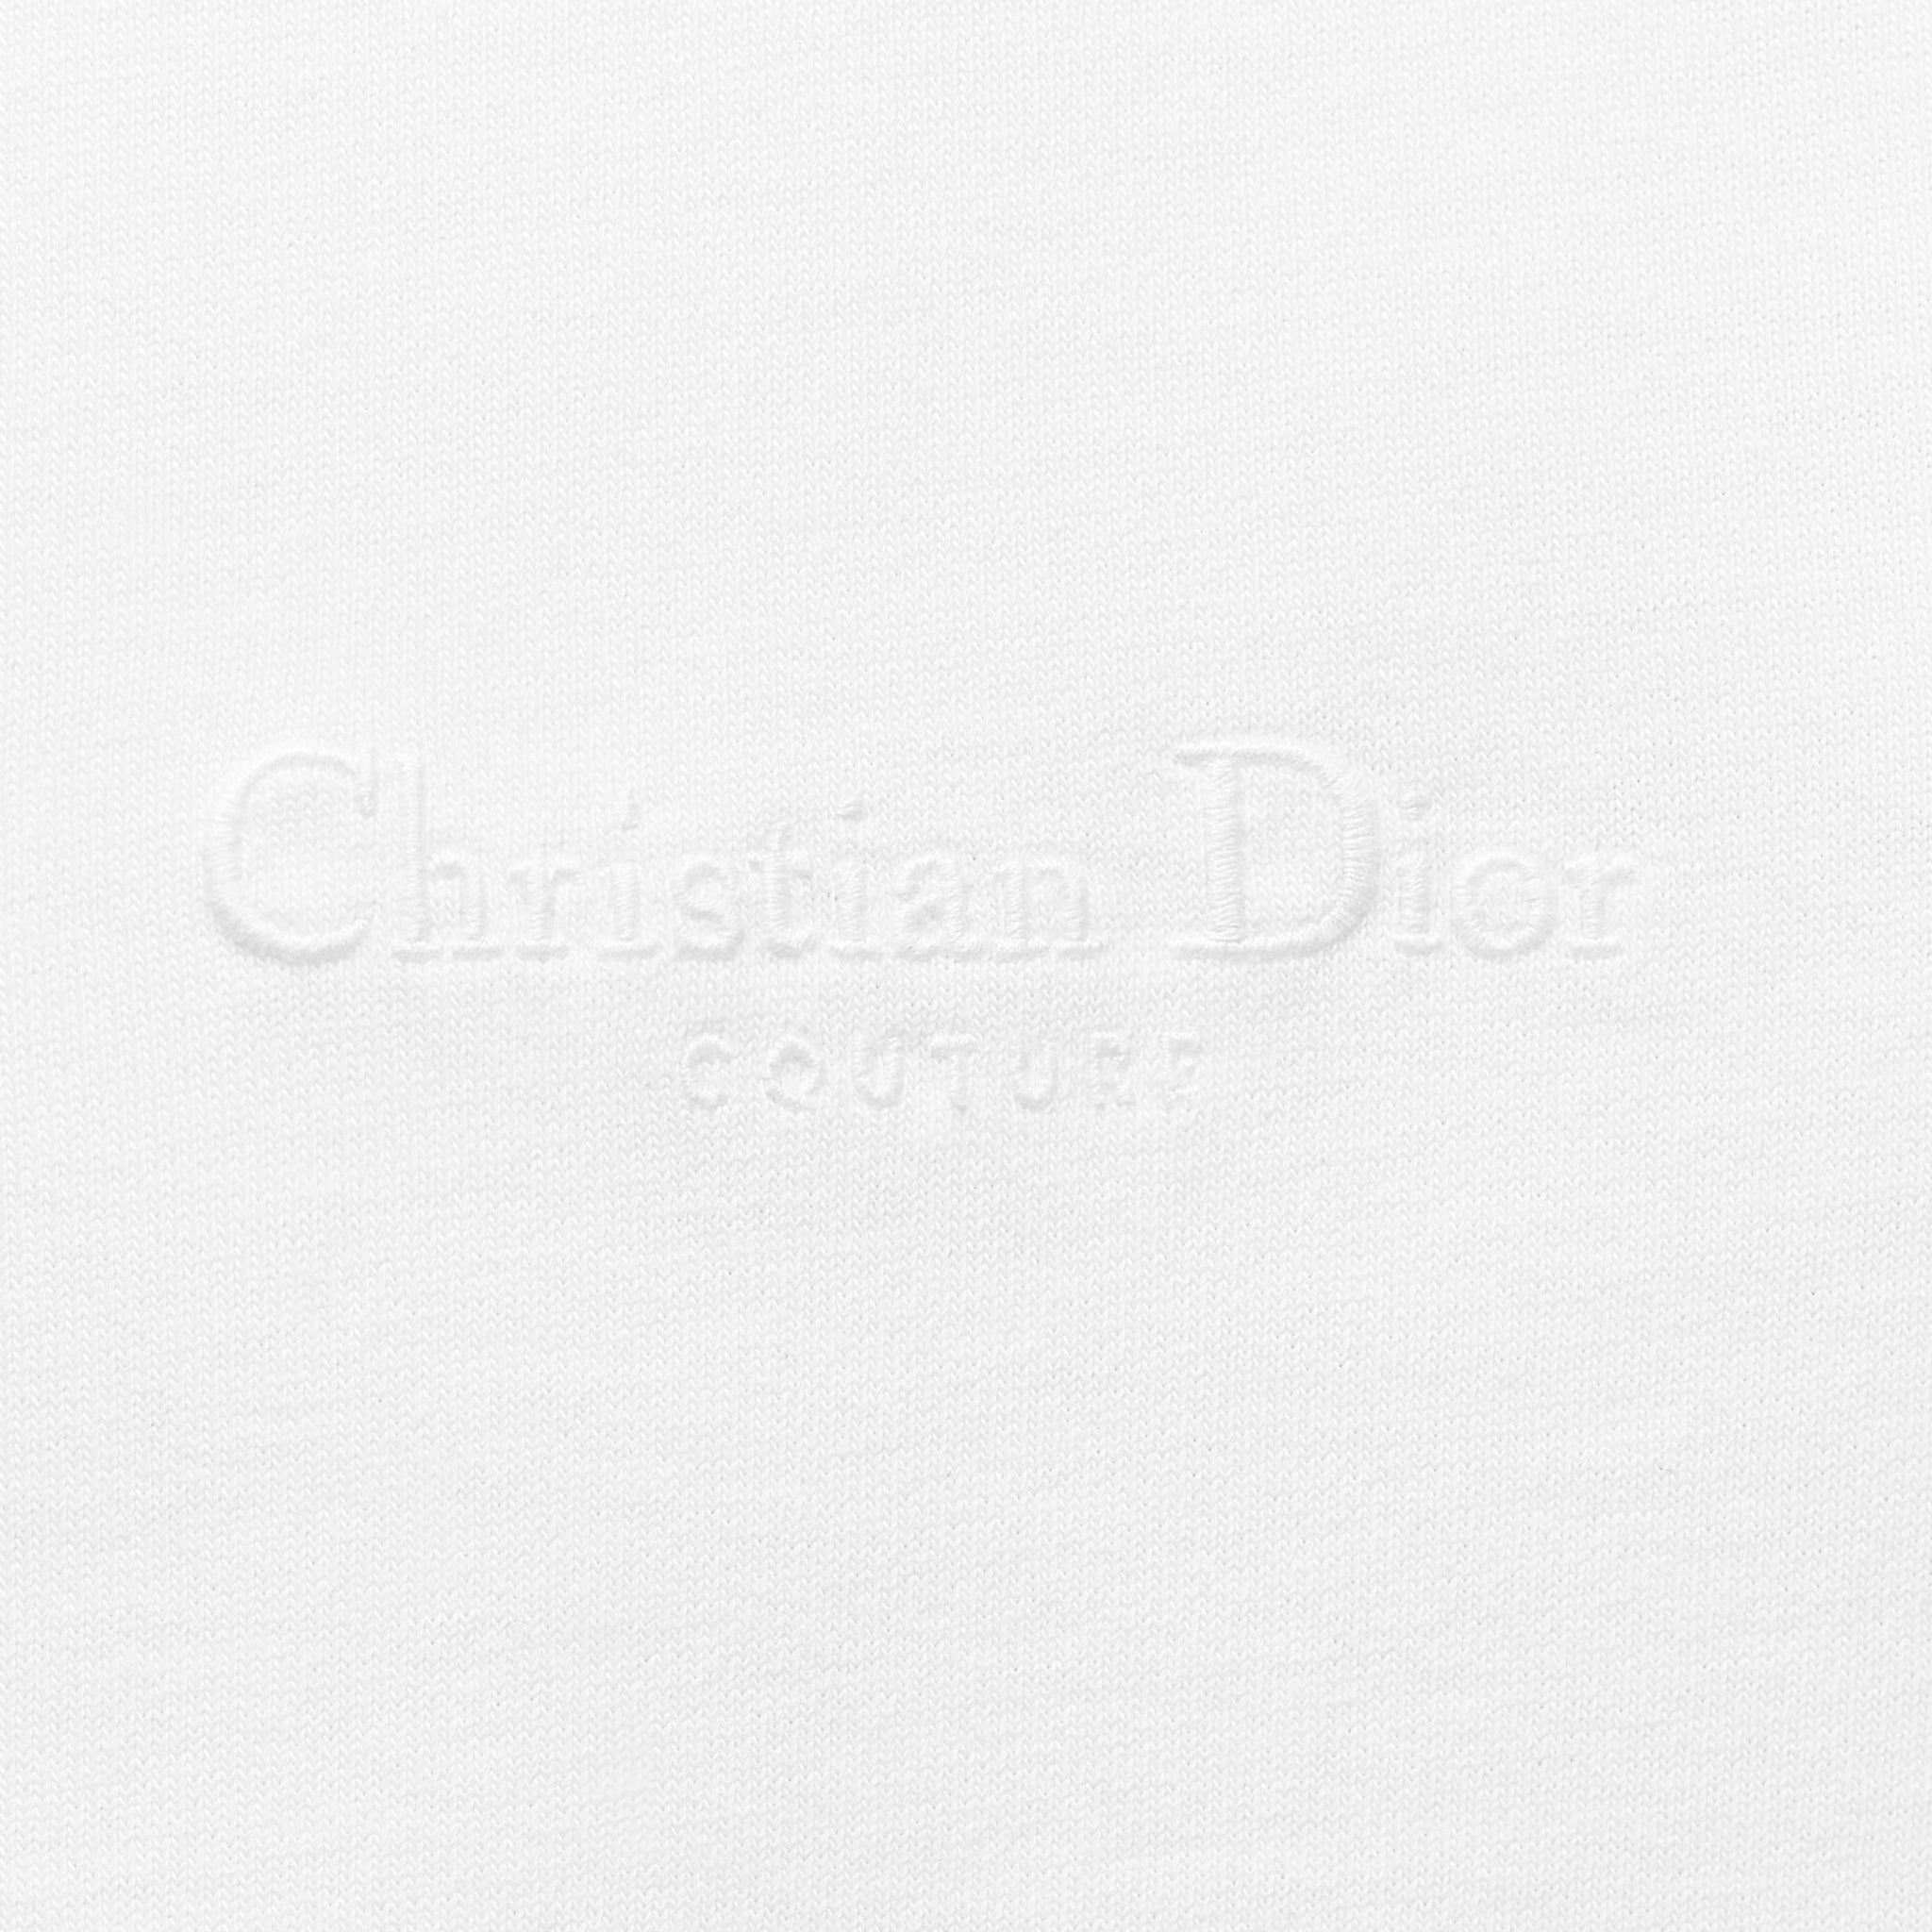 Logo view of Dior Christian Dior Couture Relaxed Fit T Shirt White 313J696B0554_C080